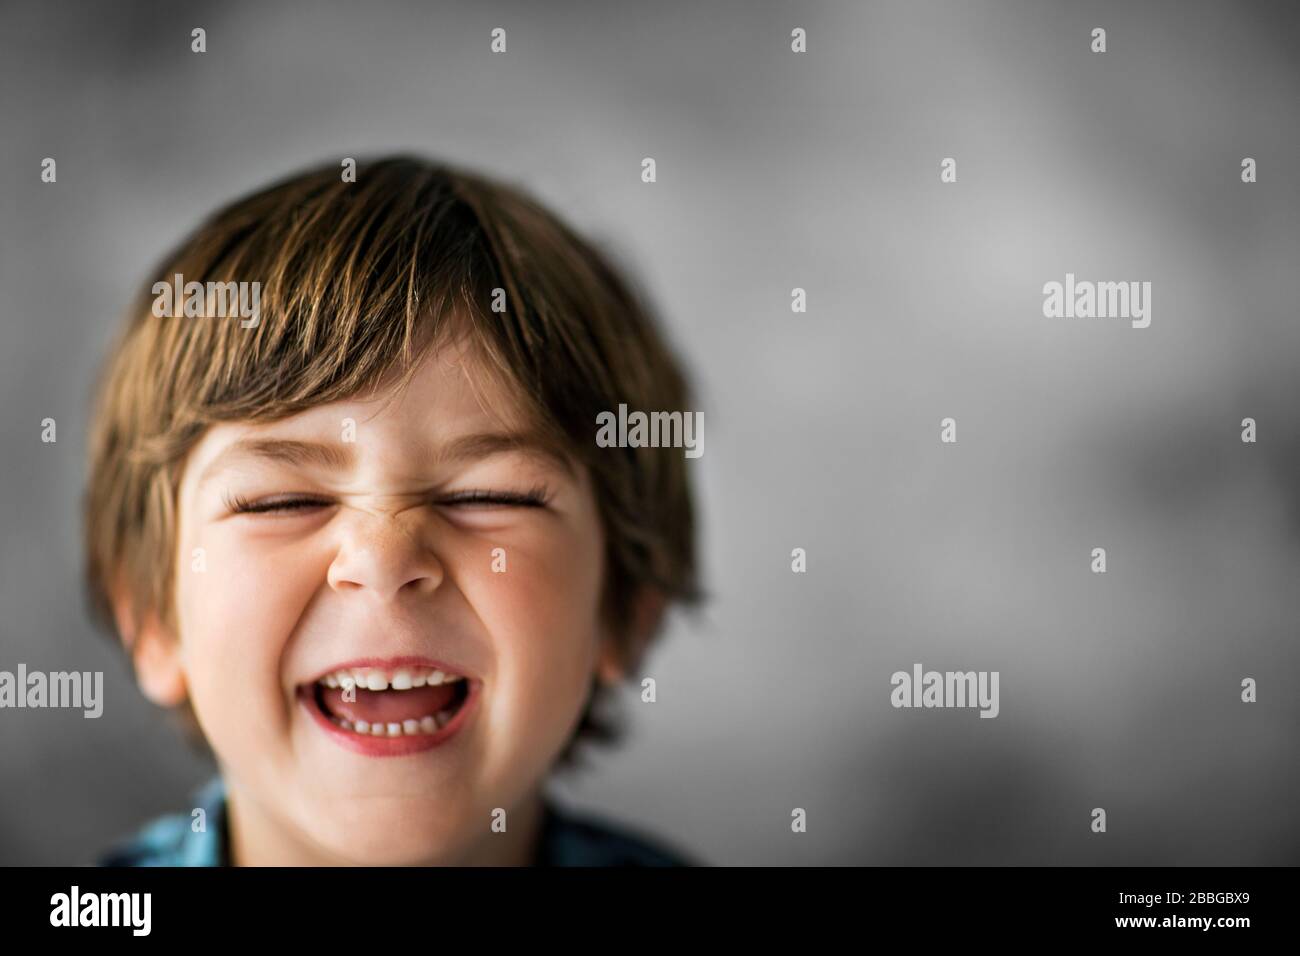 Portrait of a happy young boy making a funny face Stock Photo